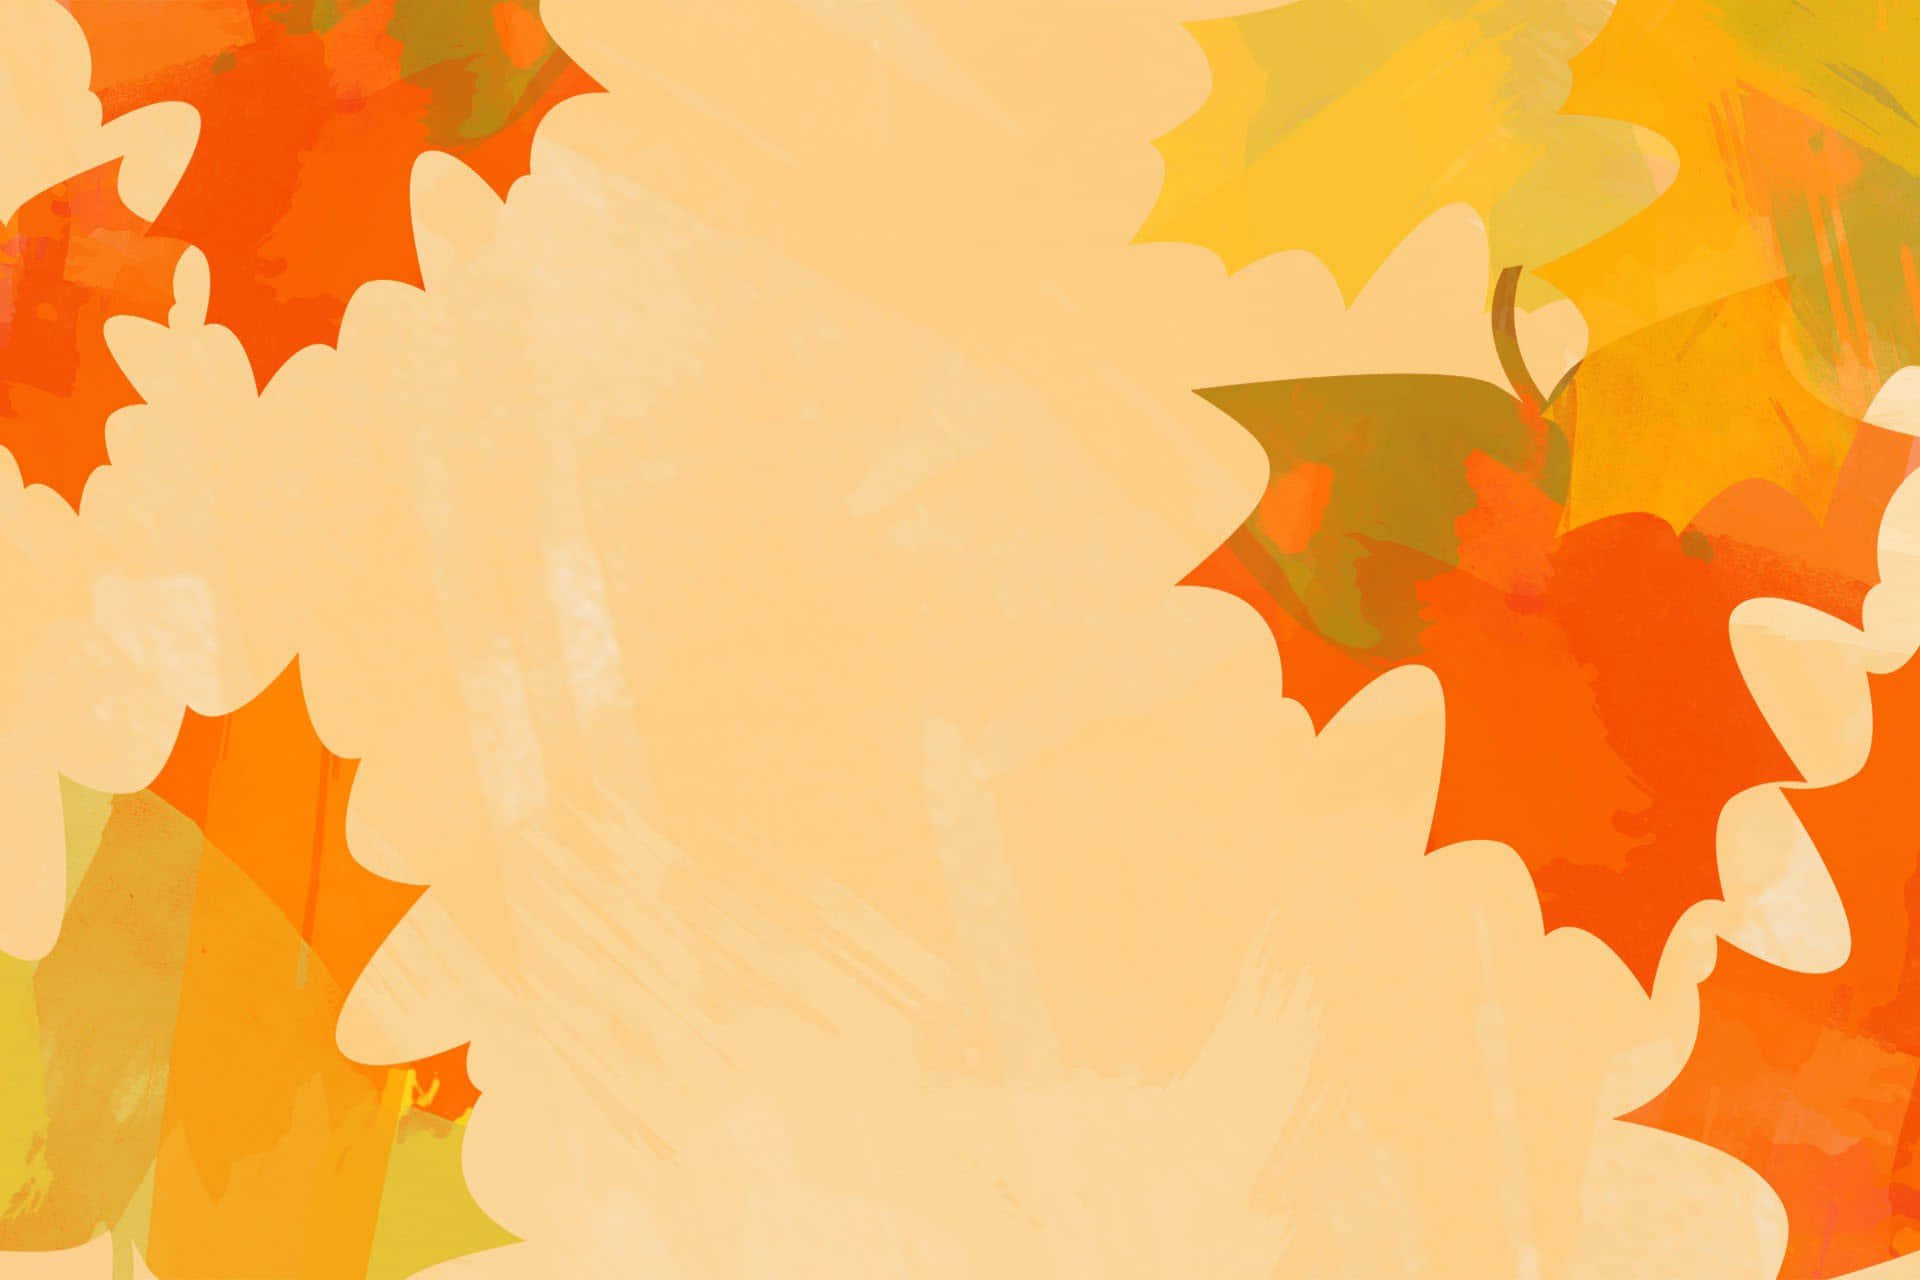 Celebrate the season with this cute fall backdrop